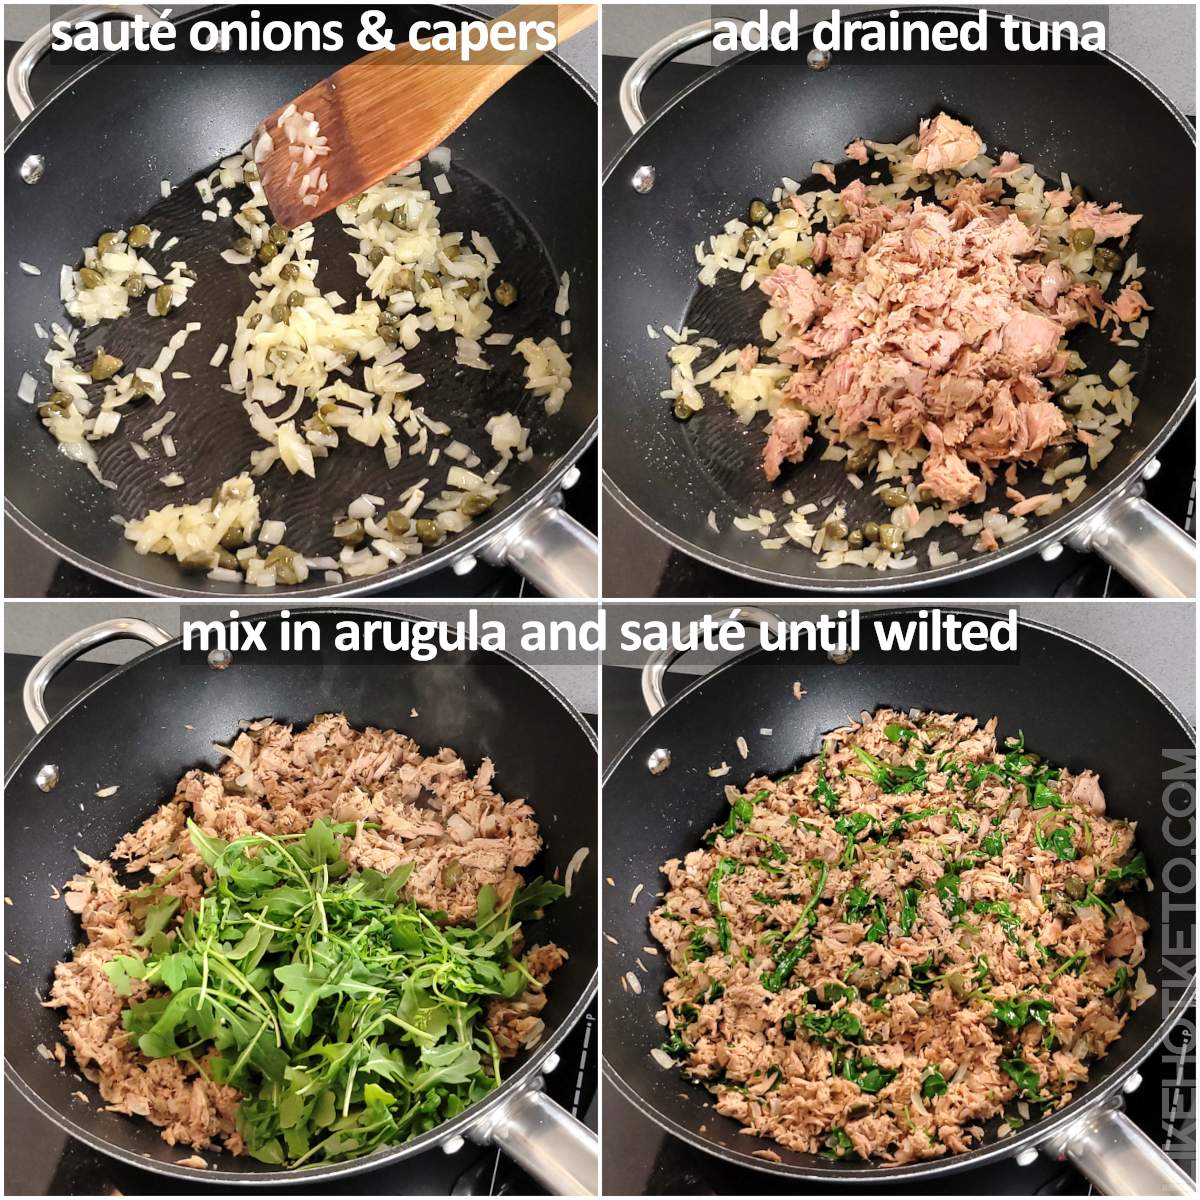 Steps for sautéing the onions, capers, tuna and arugula.